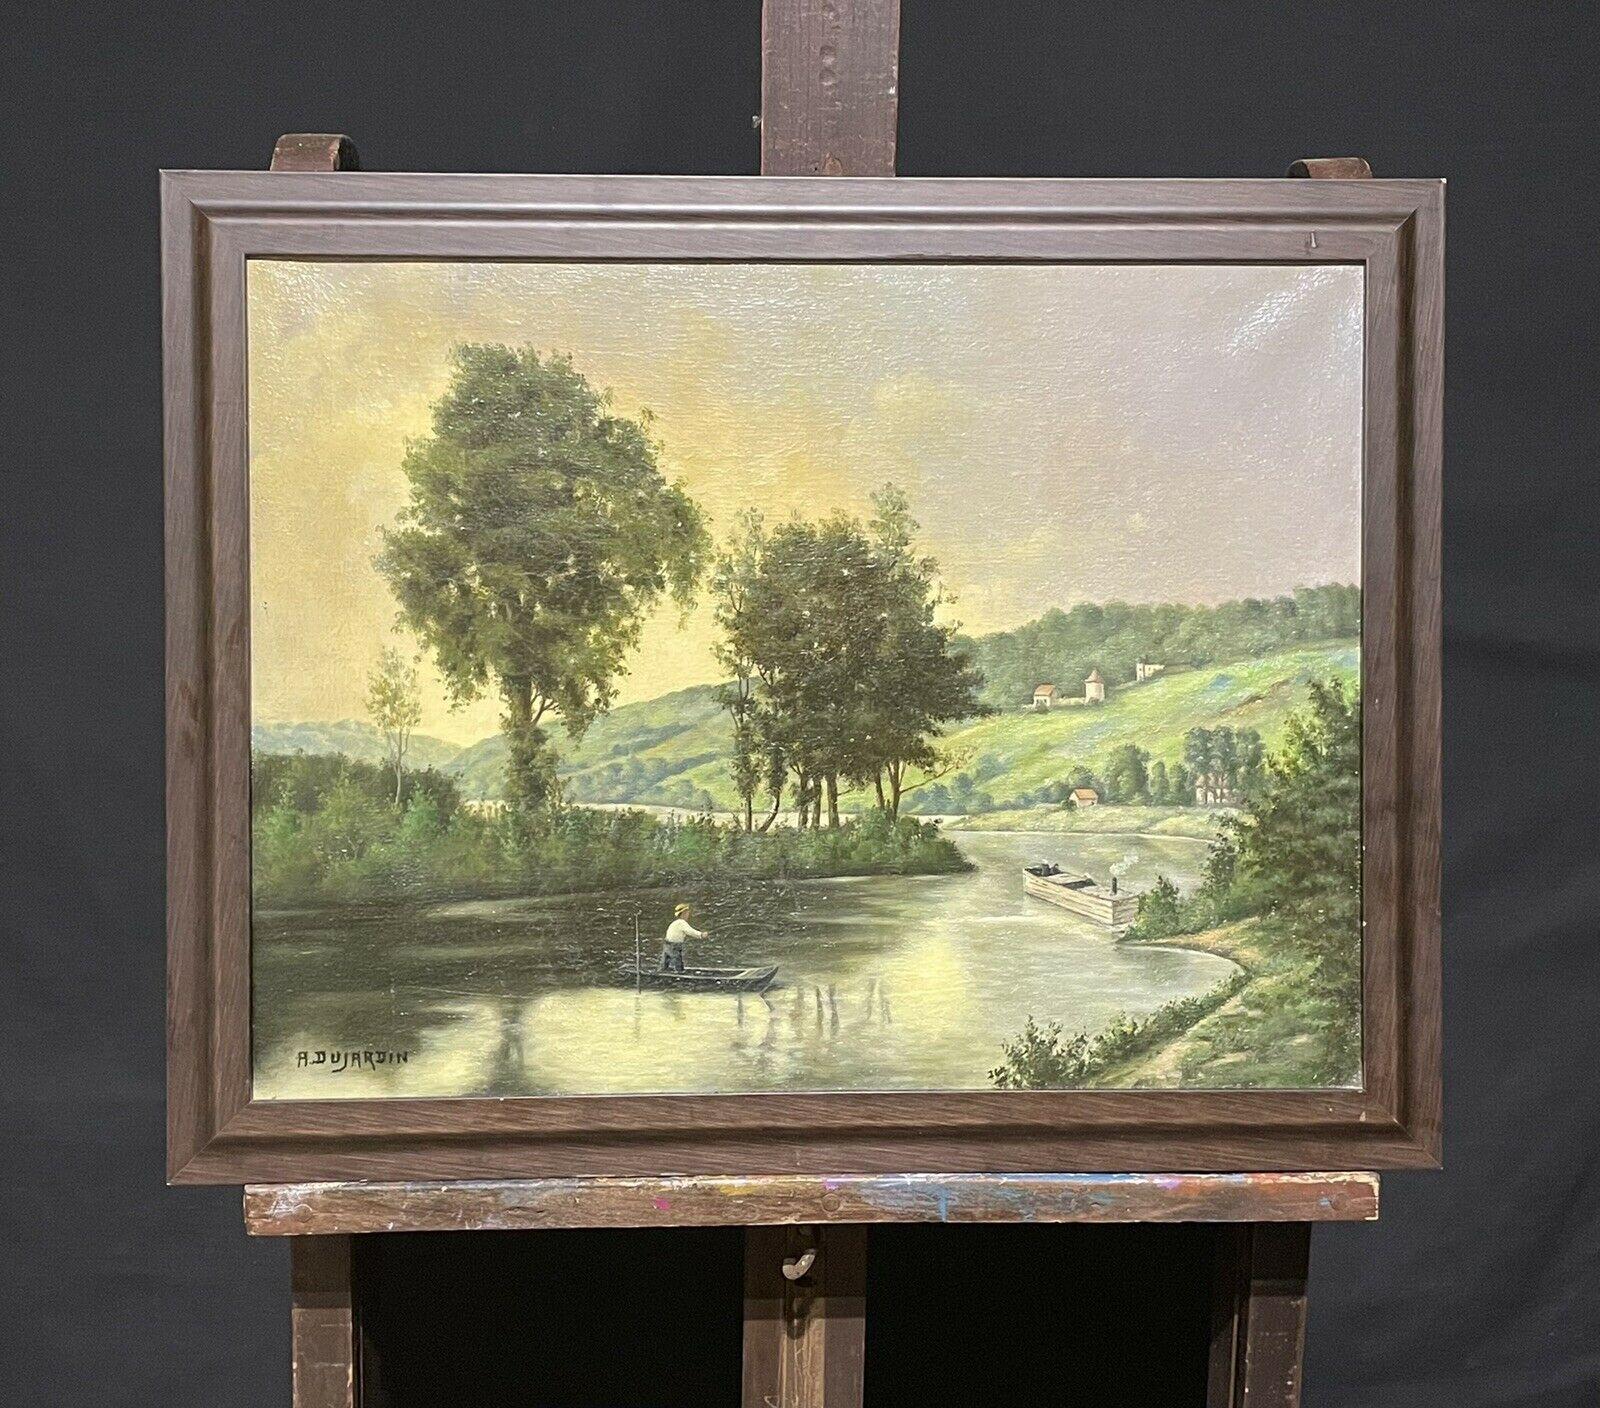 VINTAGE FRENCH SIGNED OIL PAINTING - FIGURE PUNTING IN GOLDEN RIVER LANDSCAPE - Painting by Unknown